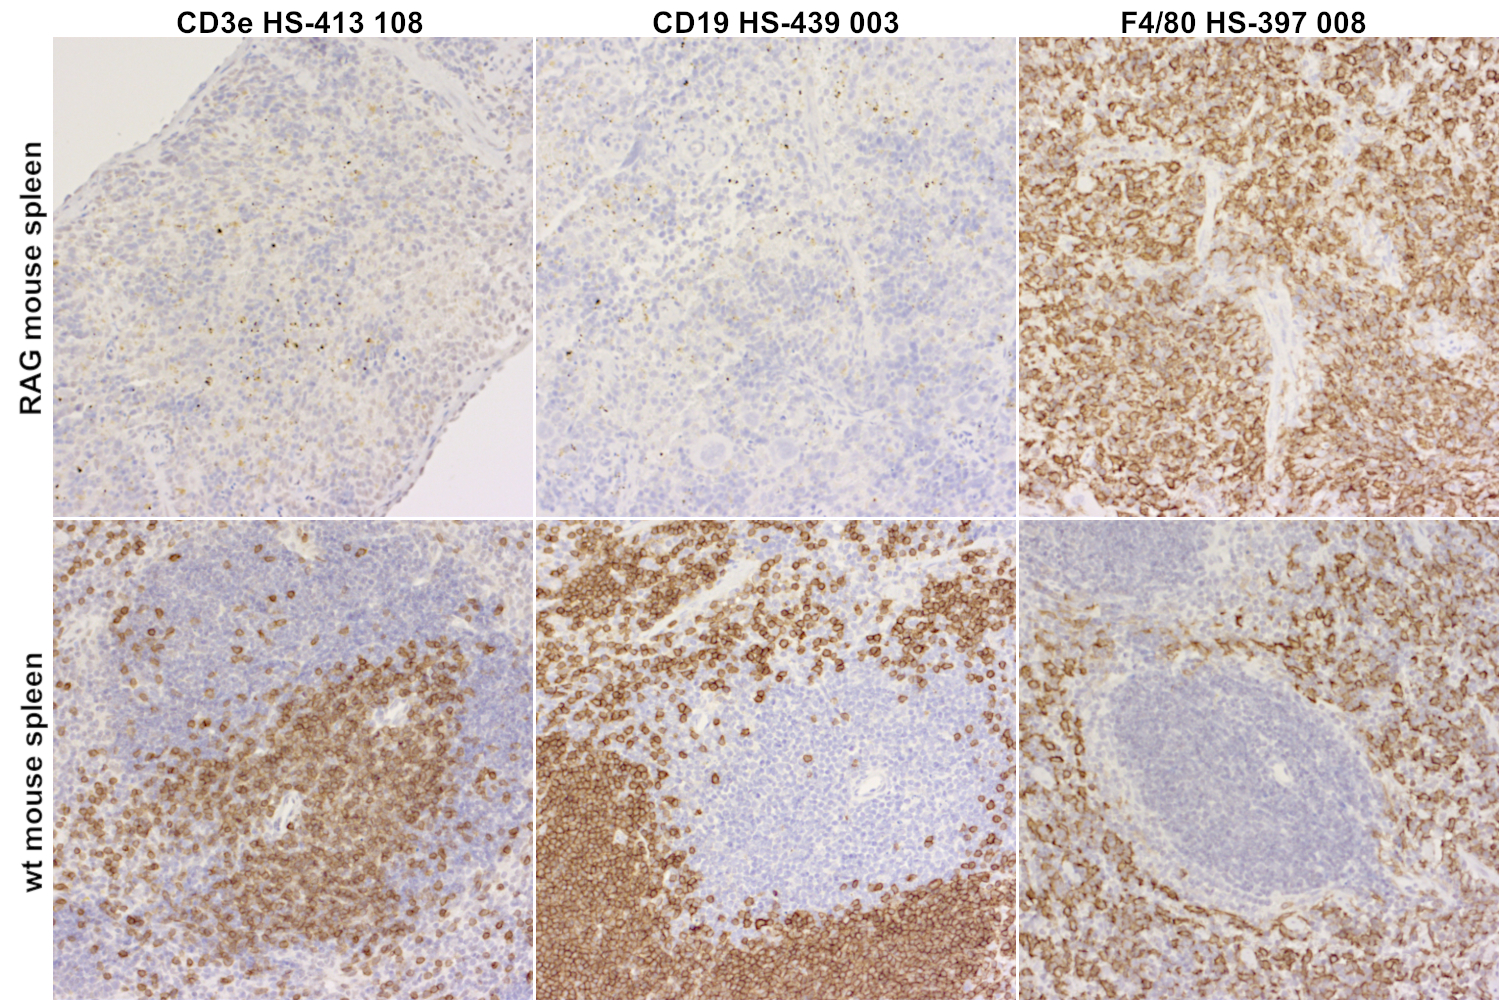 Staining for T cells, B cells and Macrophages in spleens of a Rag2/ILrg Double Knockout mouse and a wild-type mouse